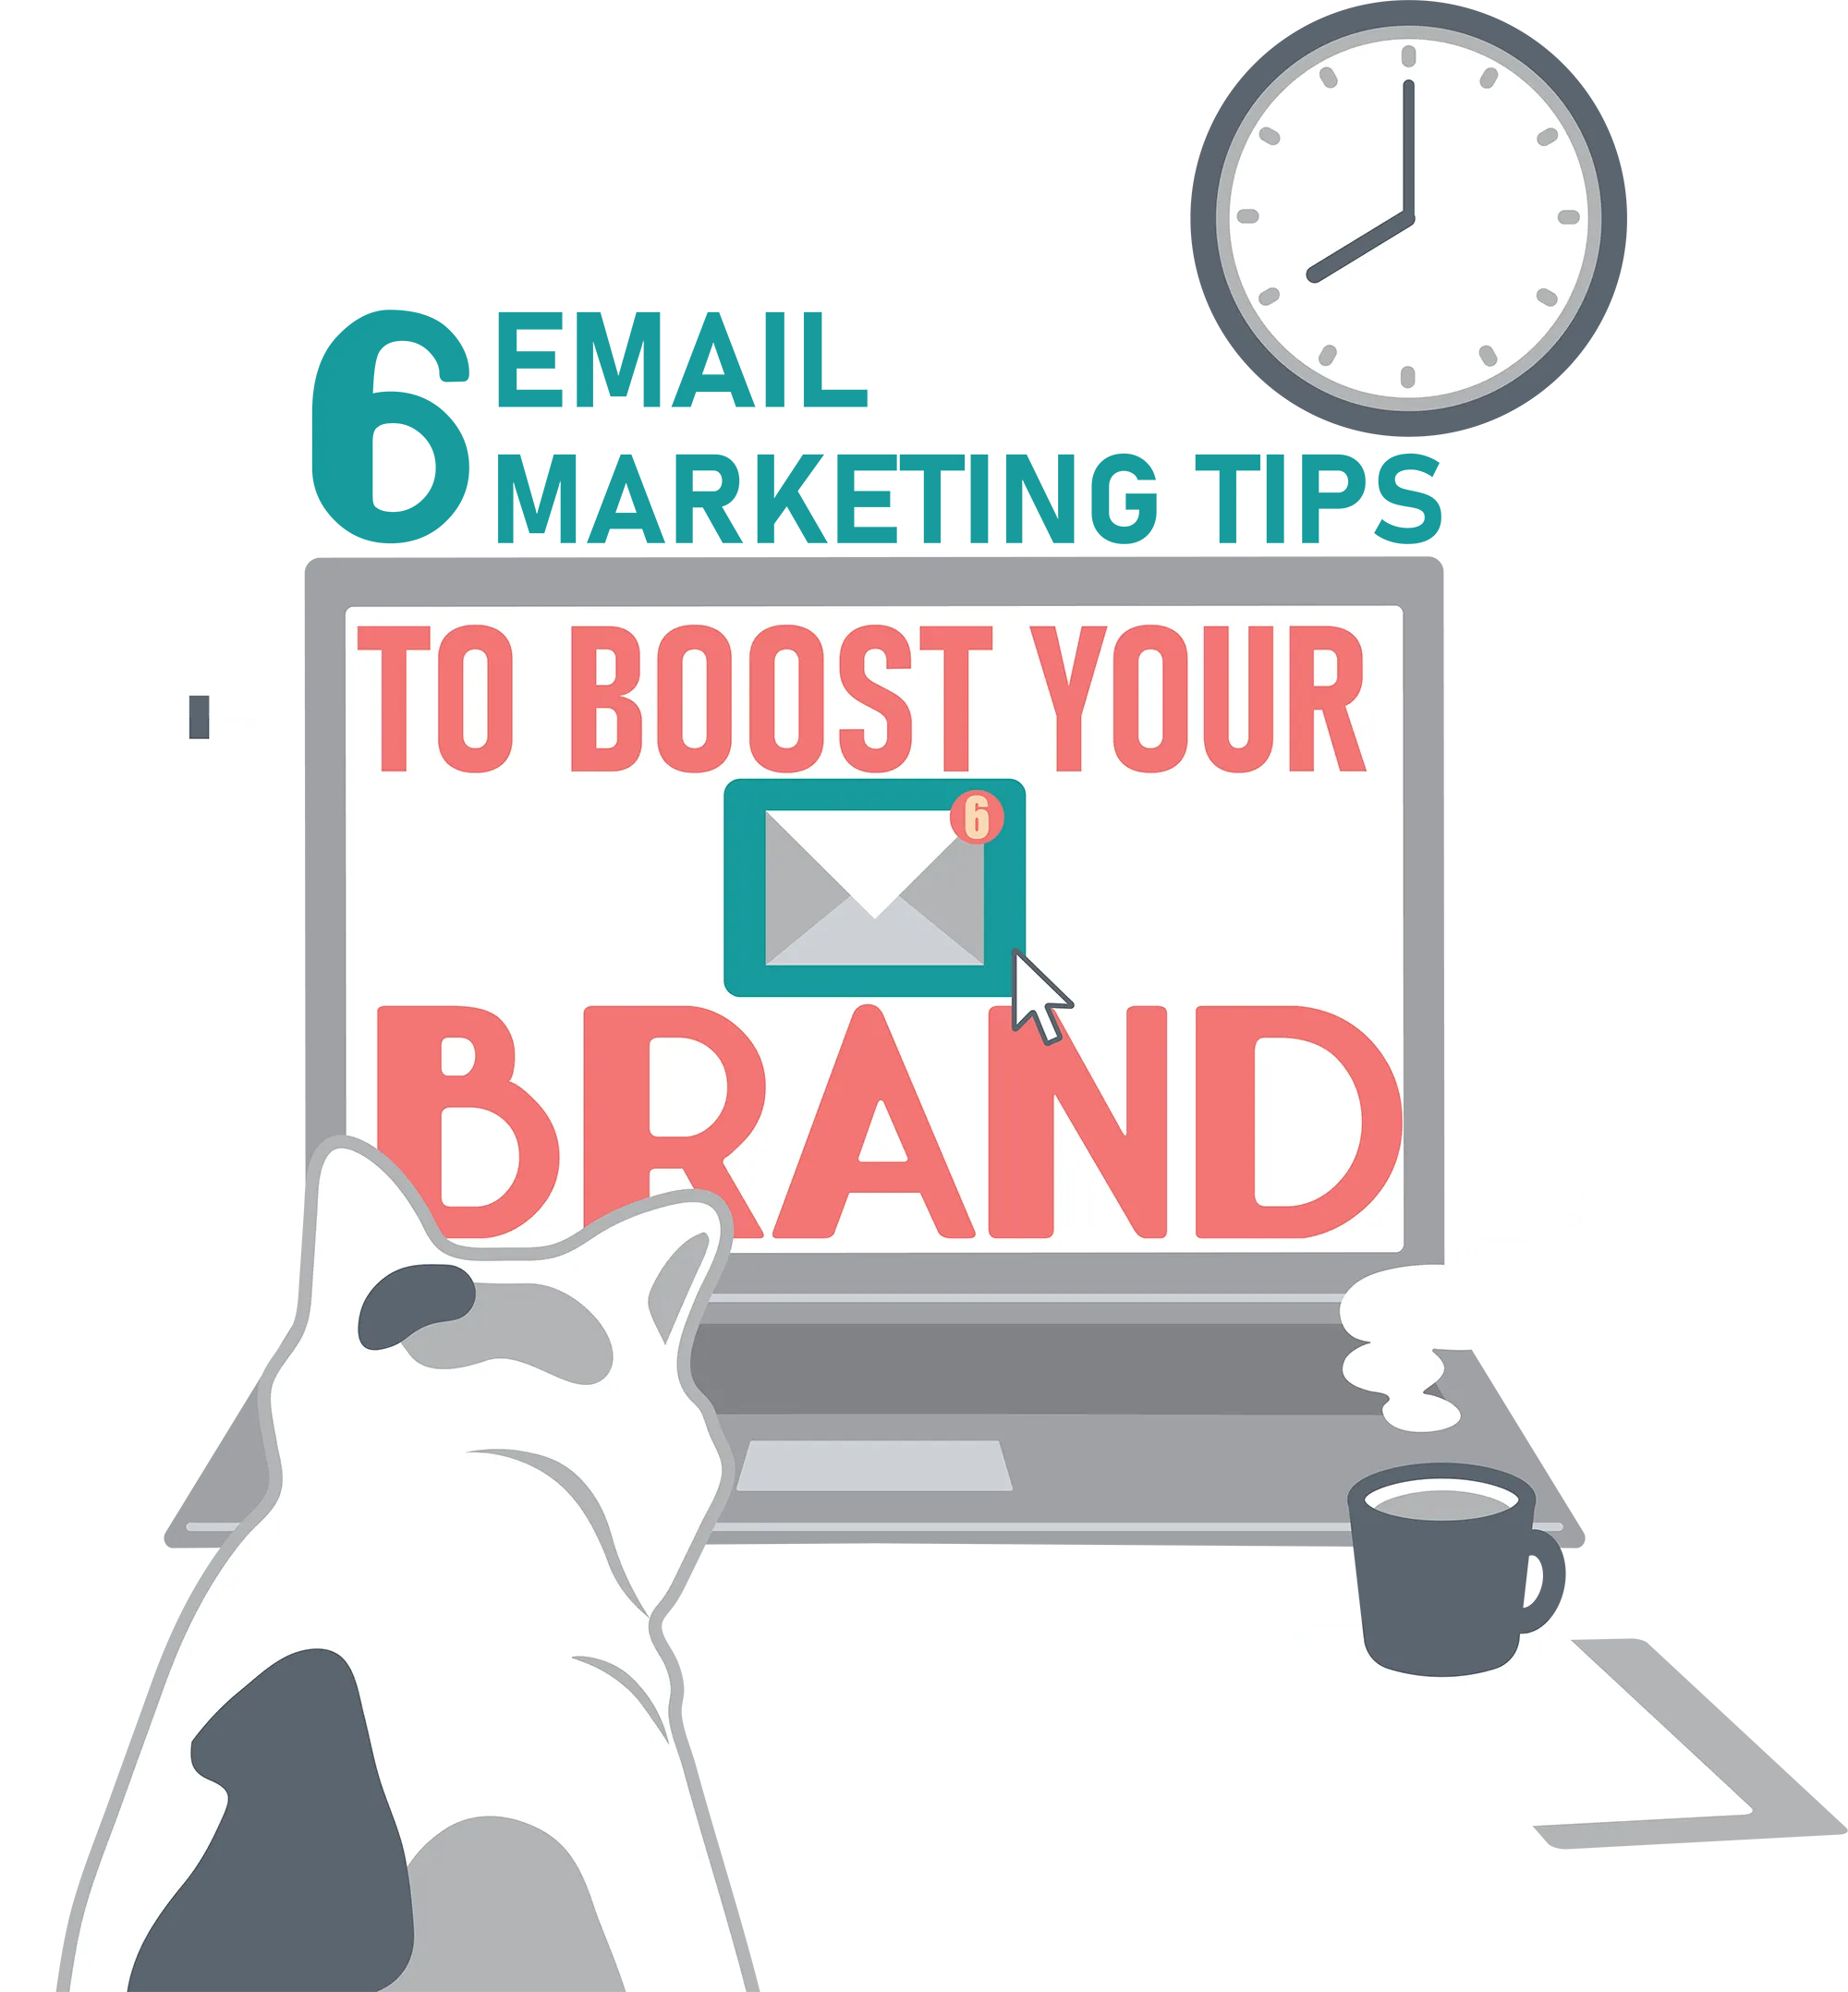 "6 Email Marketing Tips to Boost Your Brand"